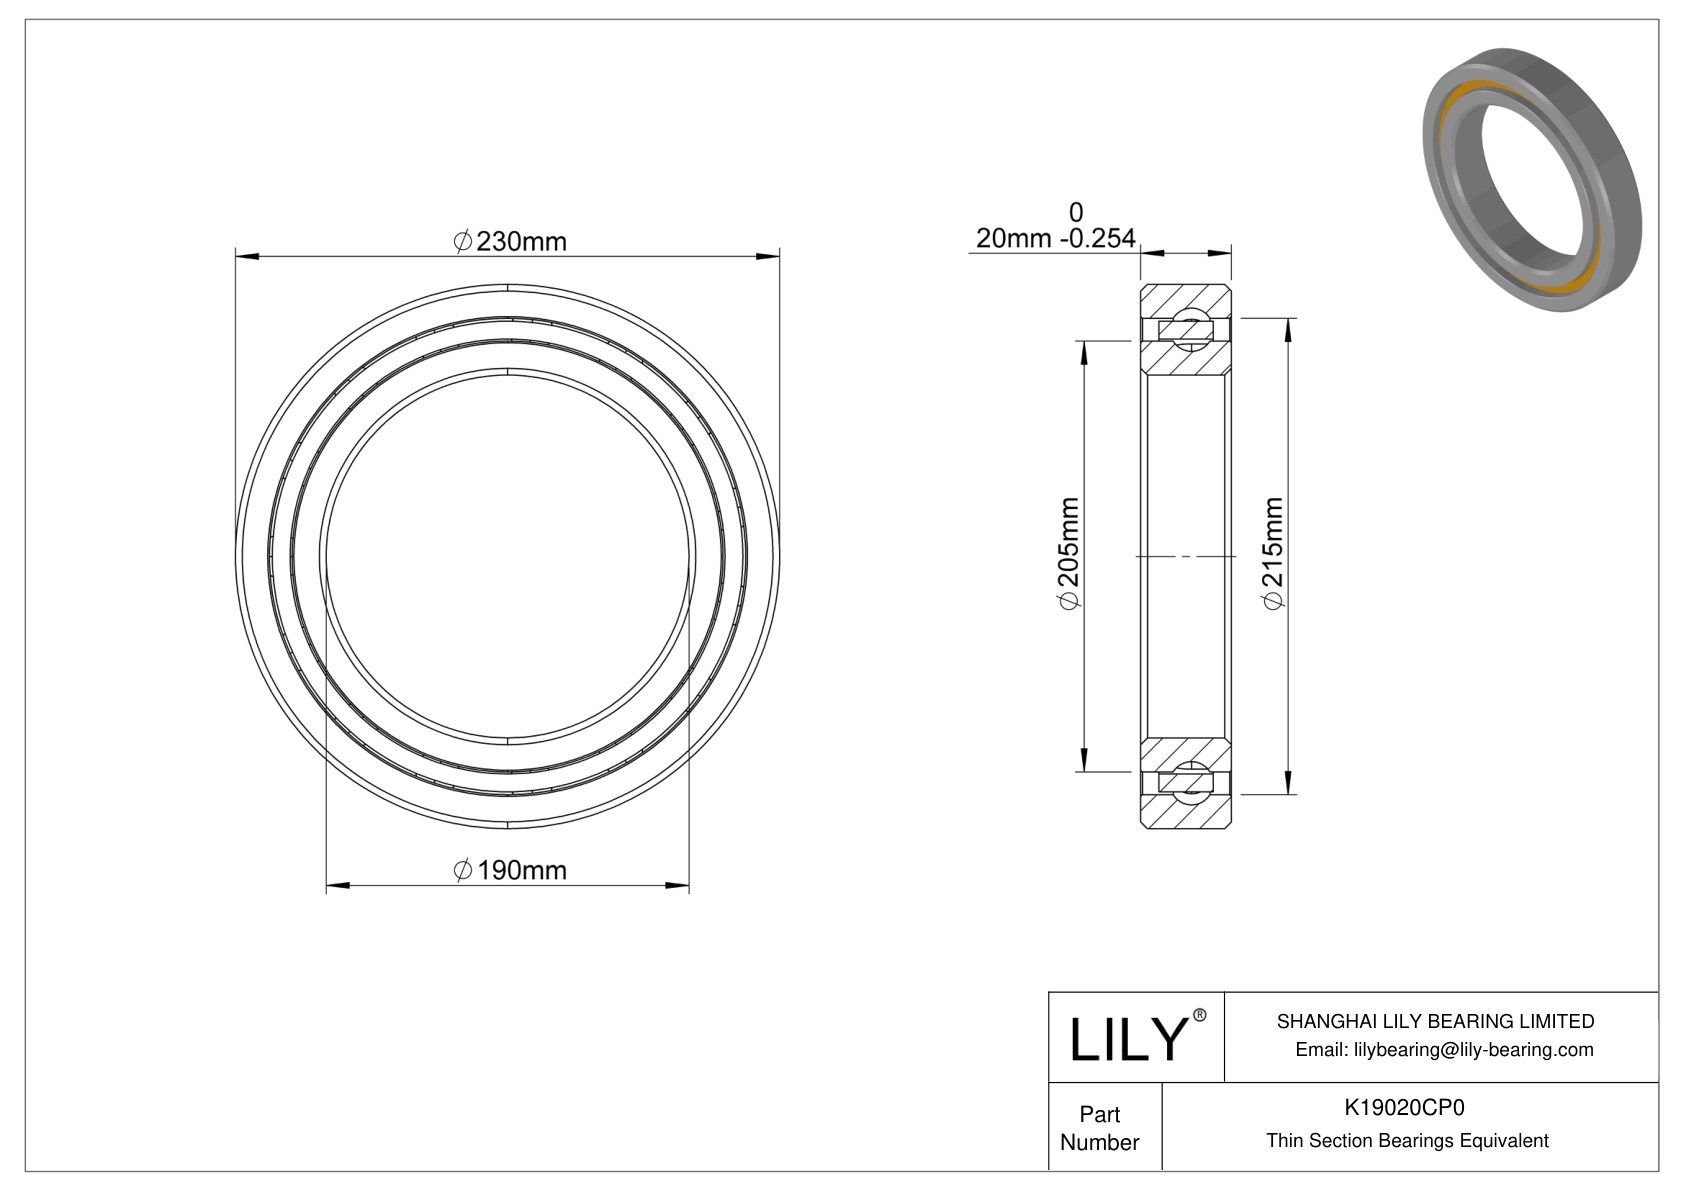 K19020CP0 Constant Section (CS) Bearings cad drawing